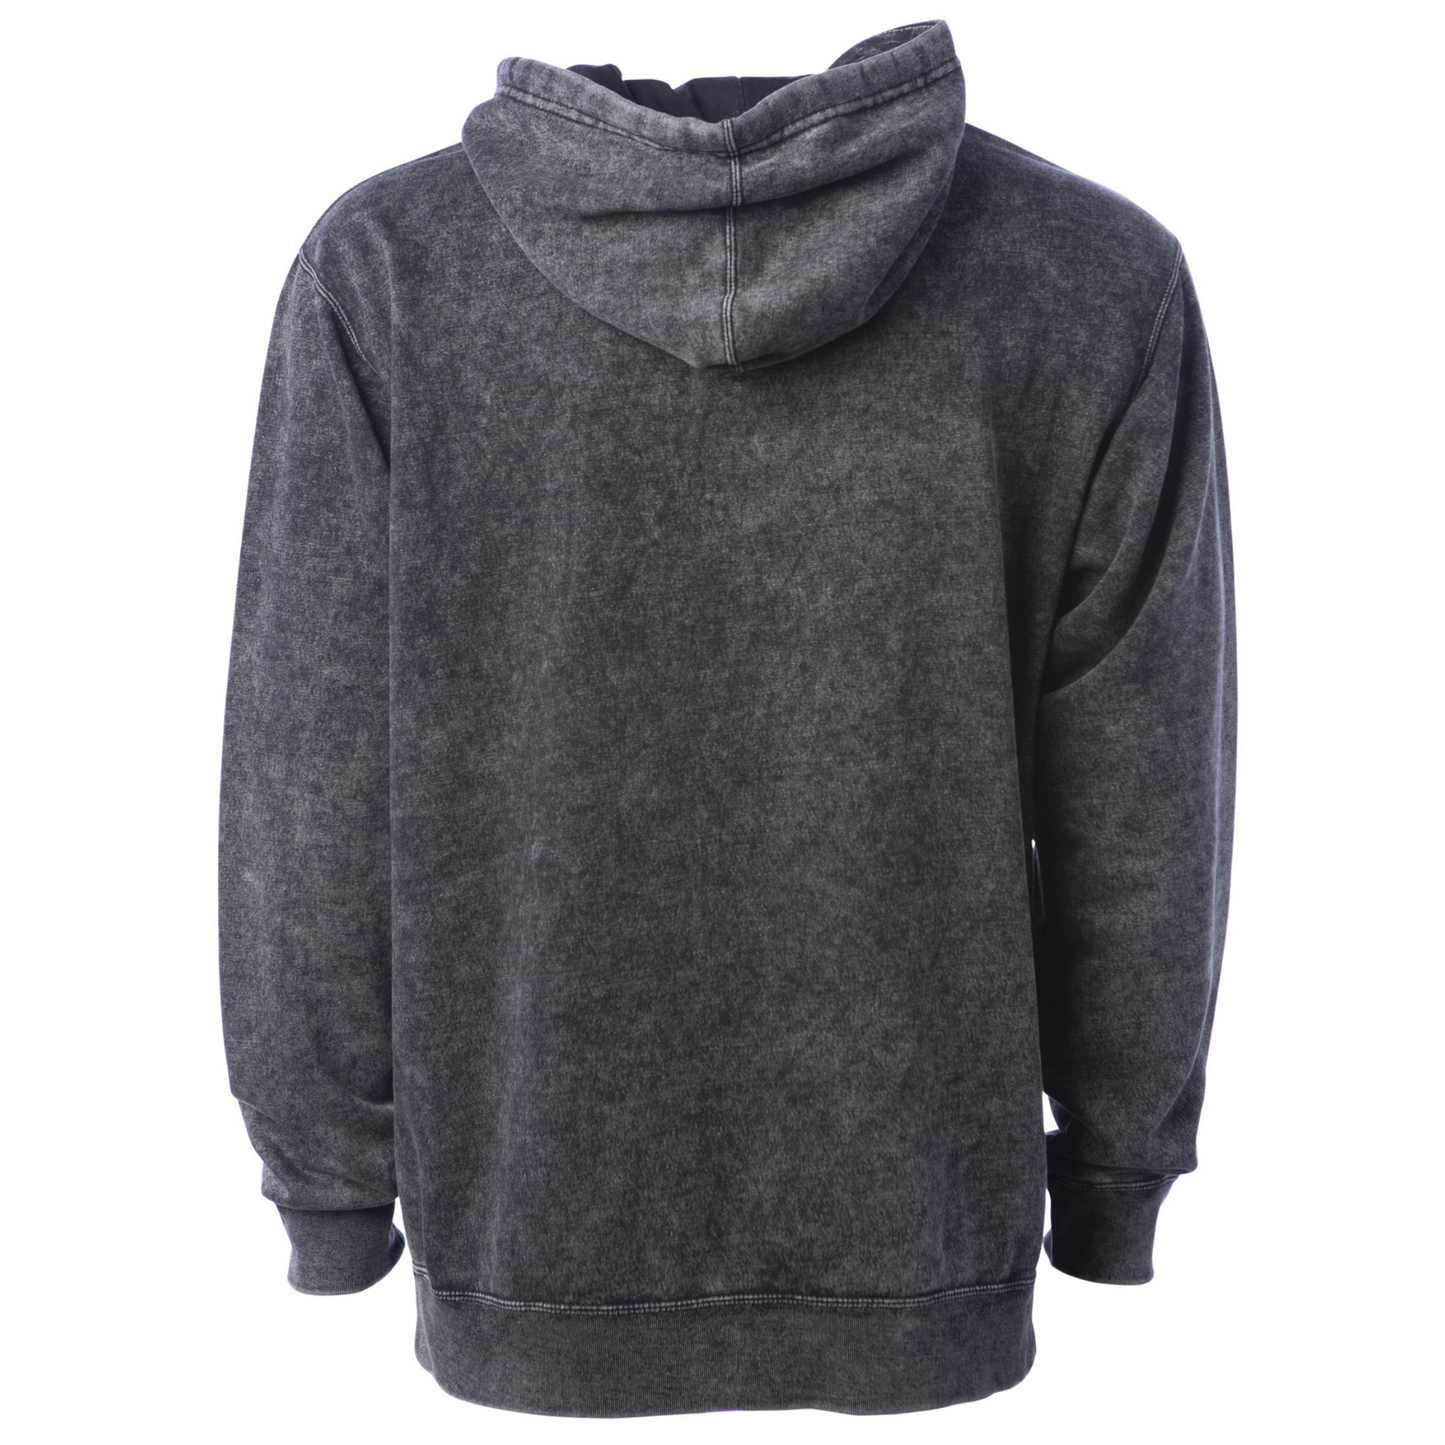 UNISEX MIDWEIGHT MINERAL WASH HOODED PULLOVER